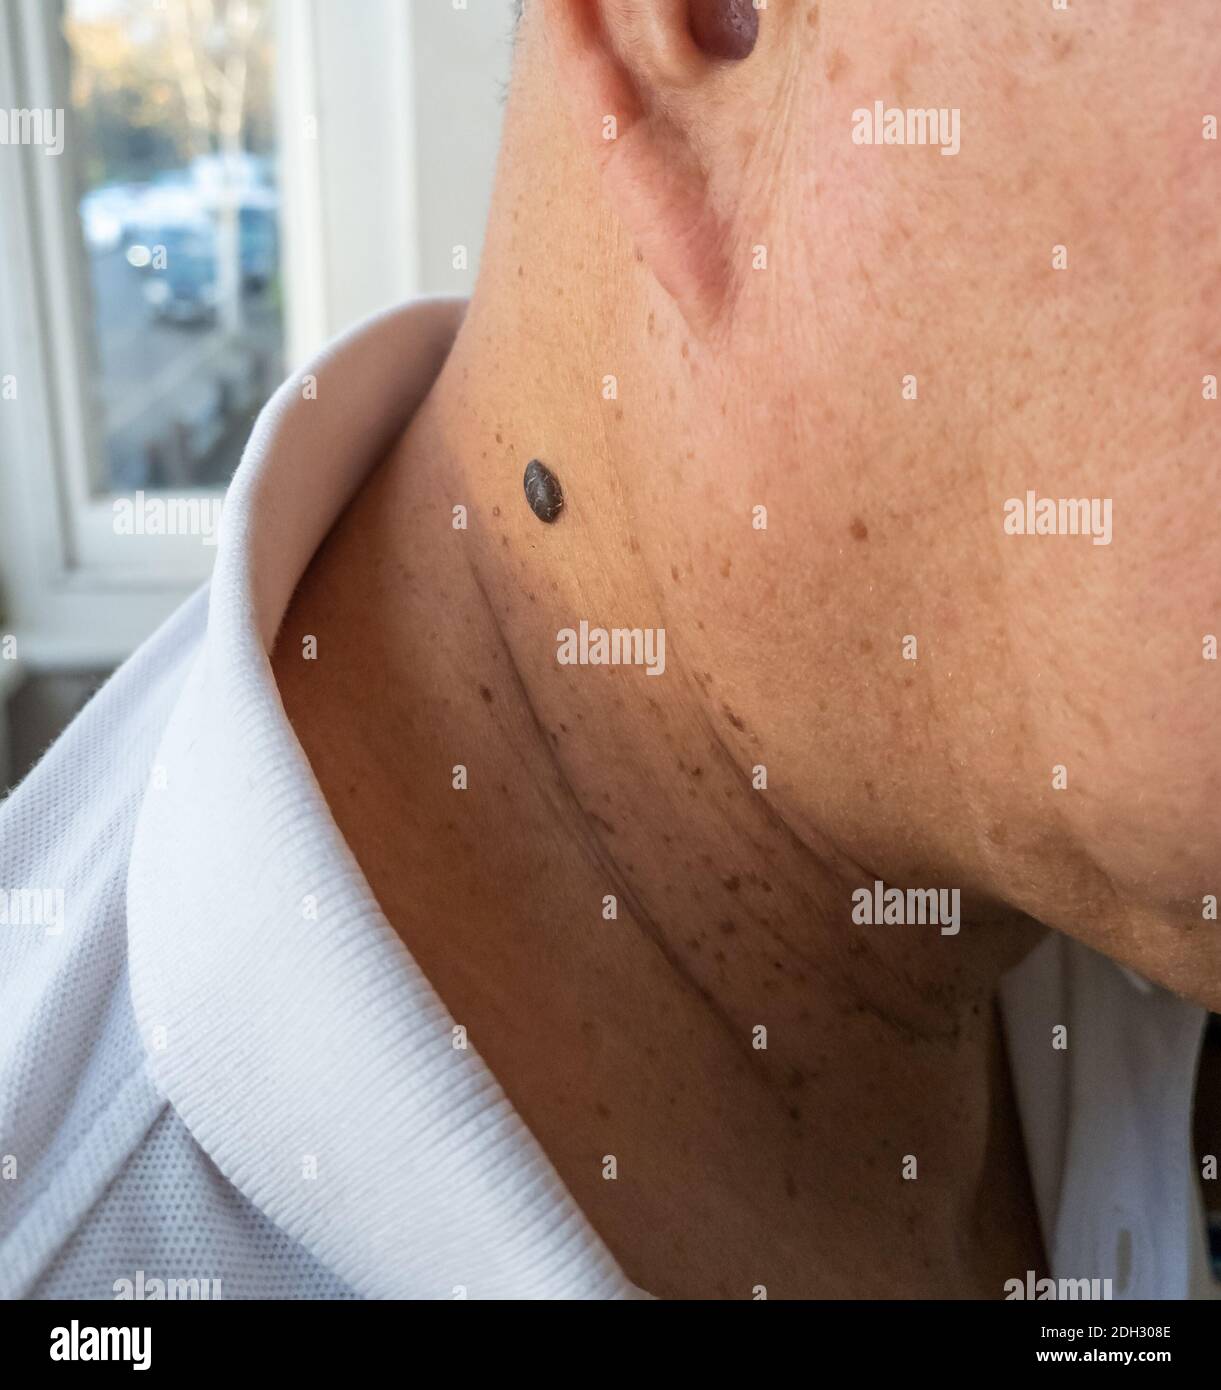 A skin mole normally as a result of exposure to ultraviolet light which can develop into Melanoma, a type of skin cancer. Stock Photo